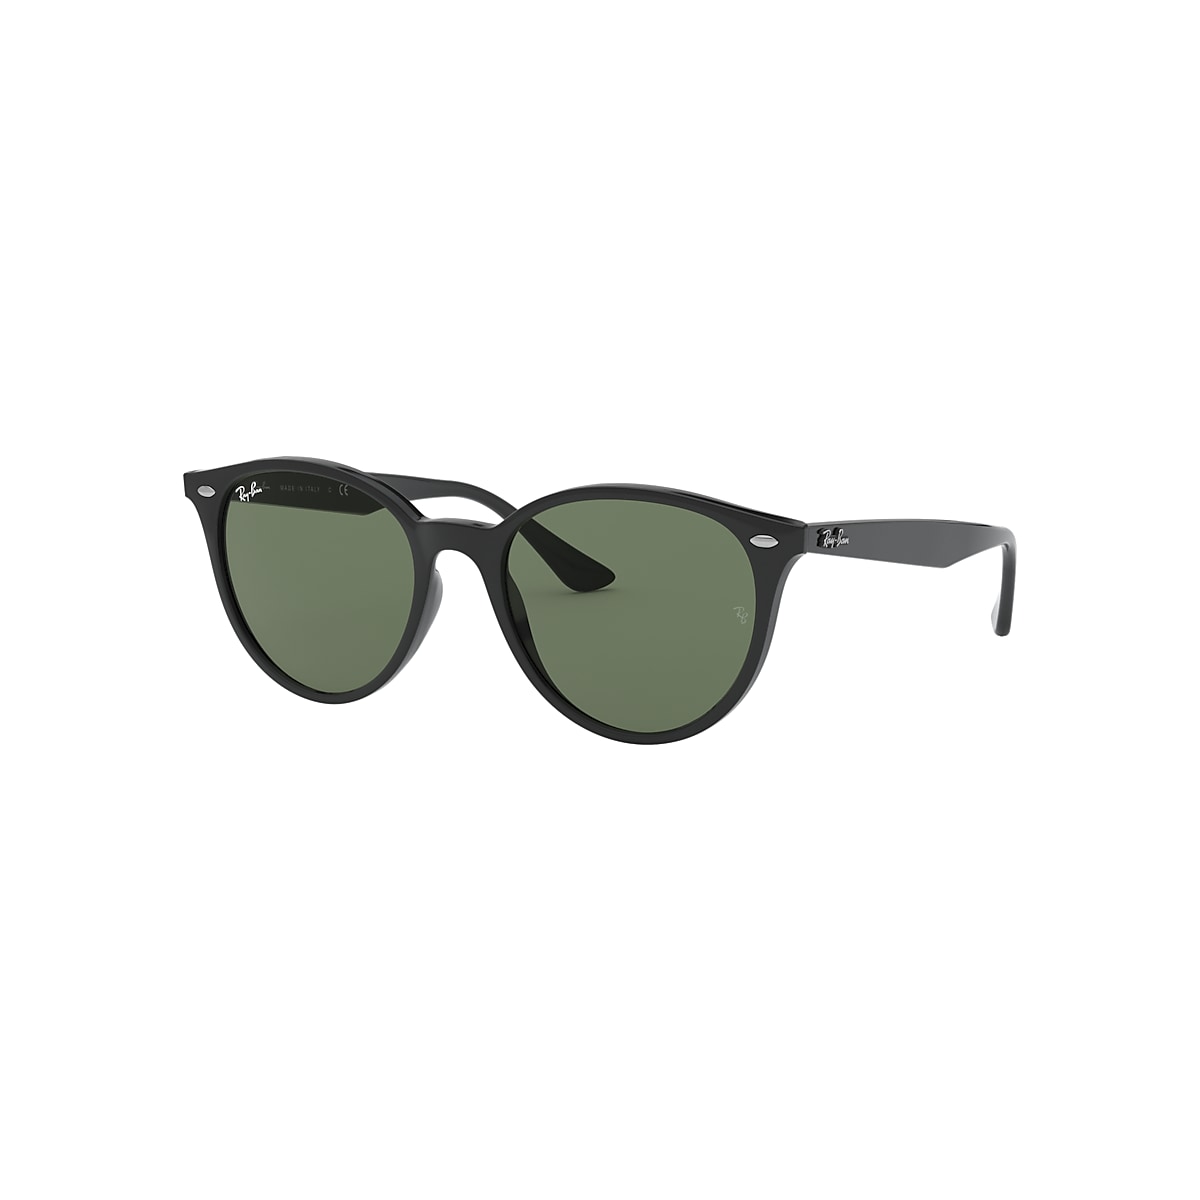 RB4305 Sunglasses in Black and Green - RB4305 | Ray-Ban® US